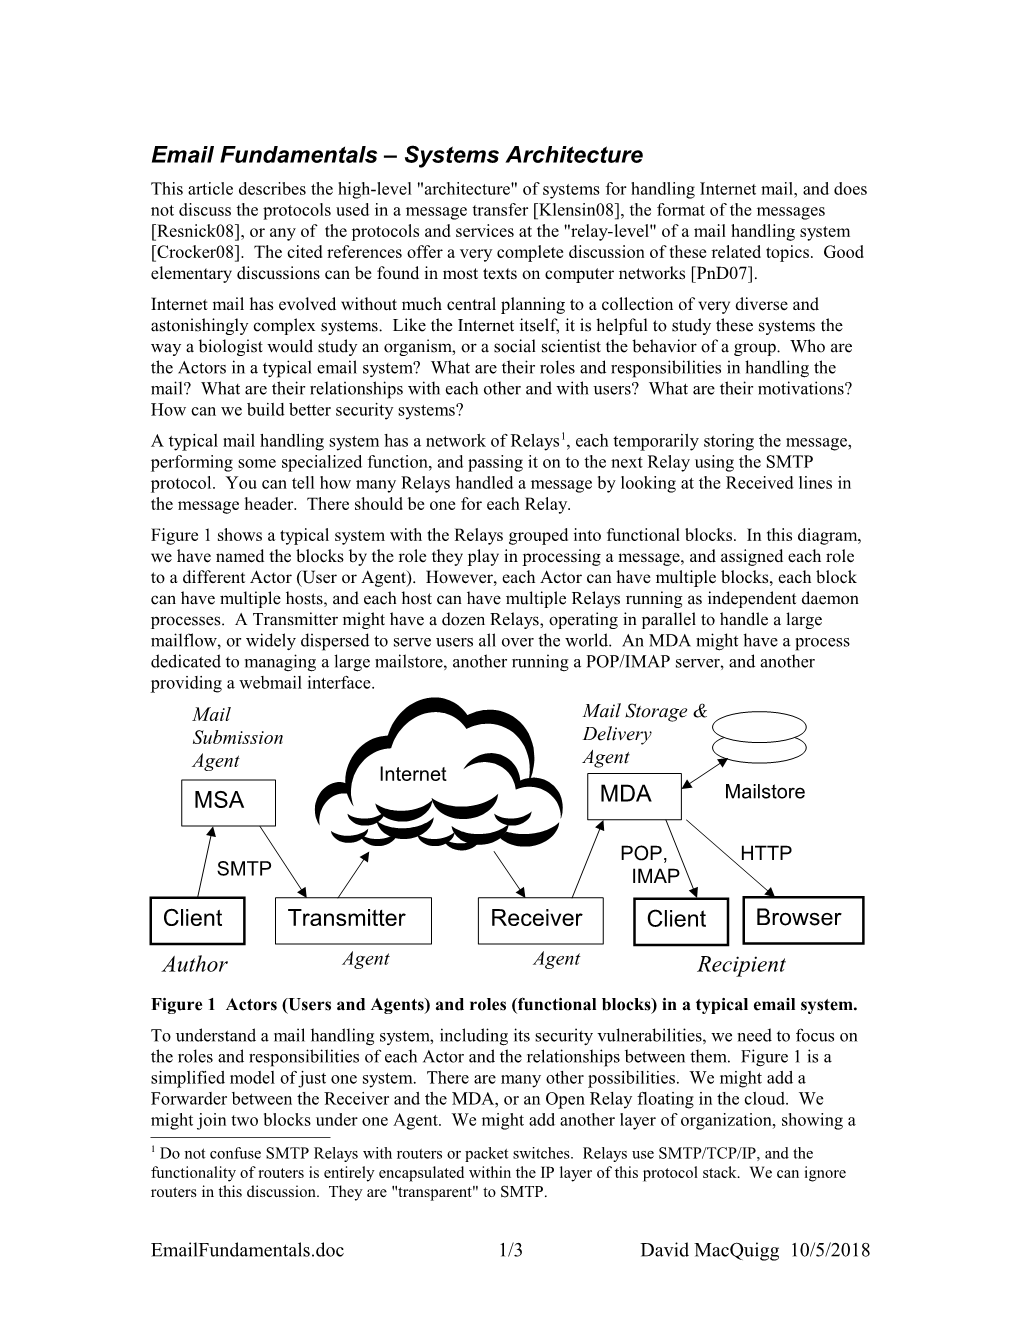 Email Fundamentals Systems Architecture